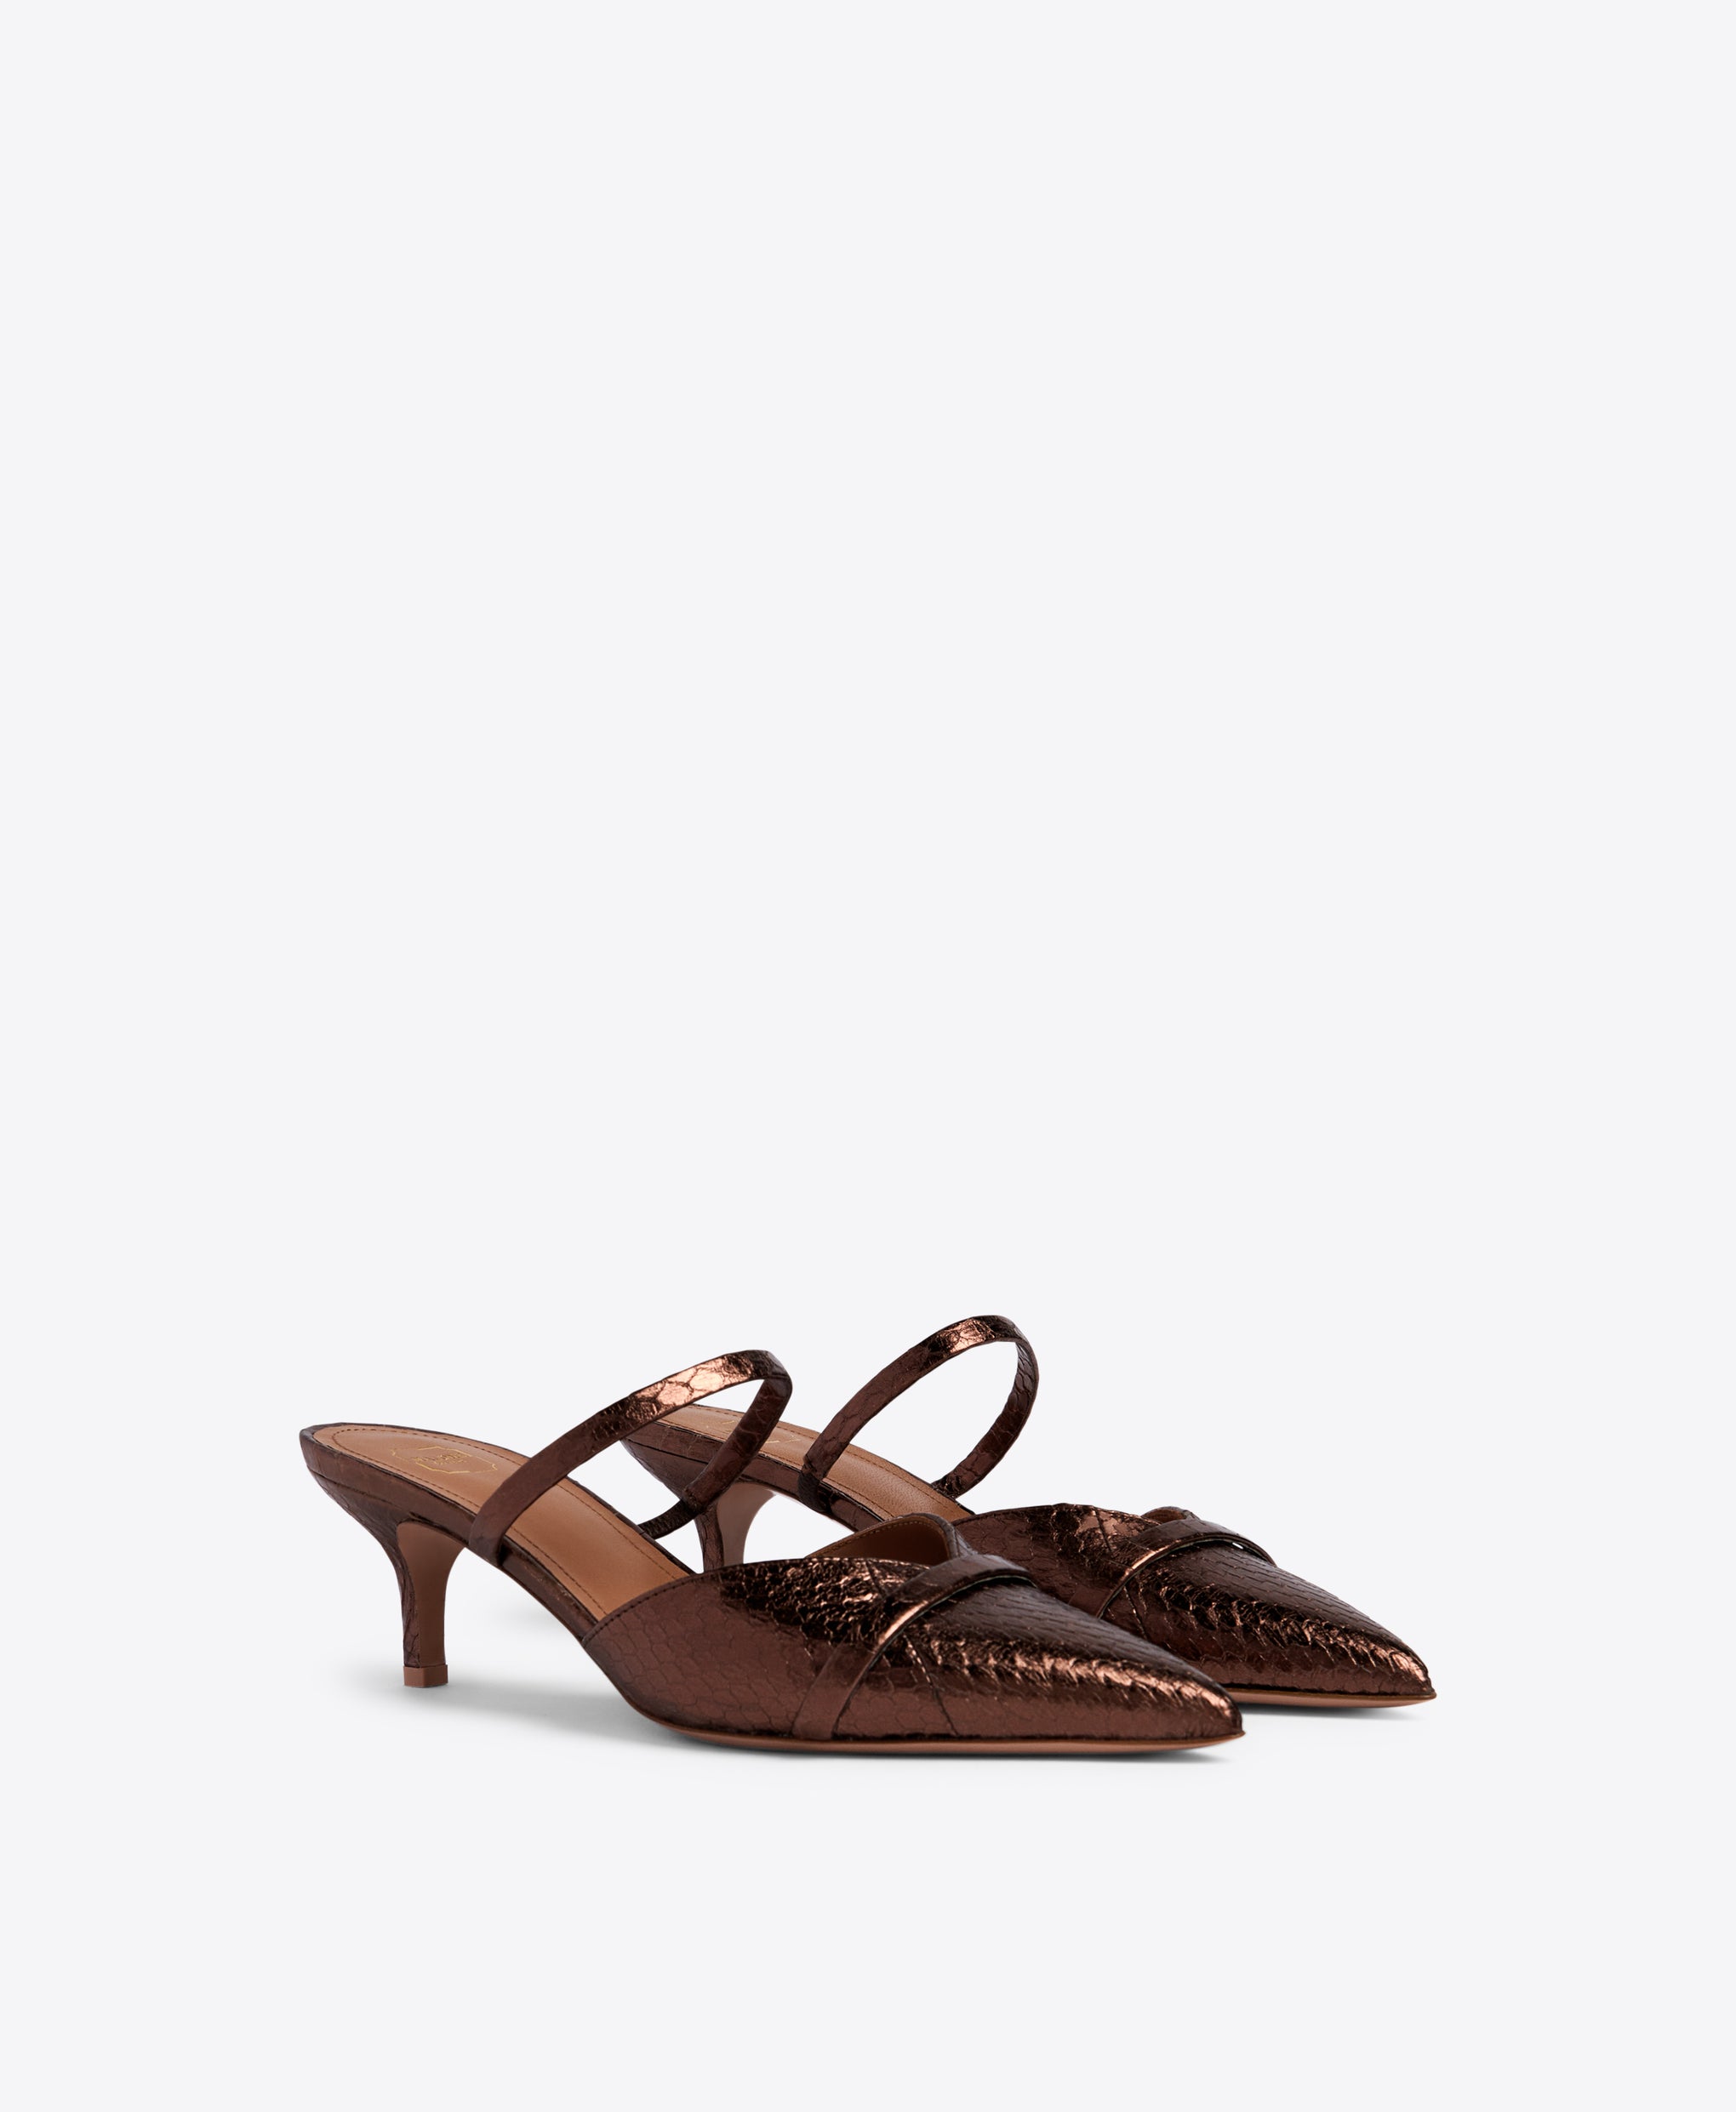 Double Strap Pointed Toe Stiletto Mules in Dark Brown Metallic | Malone Souliers